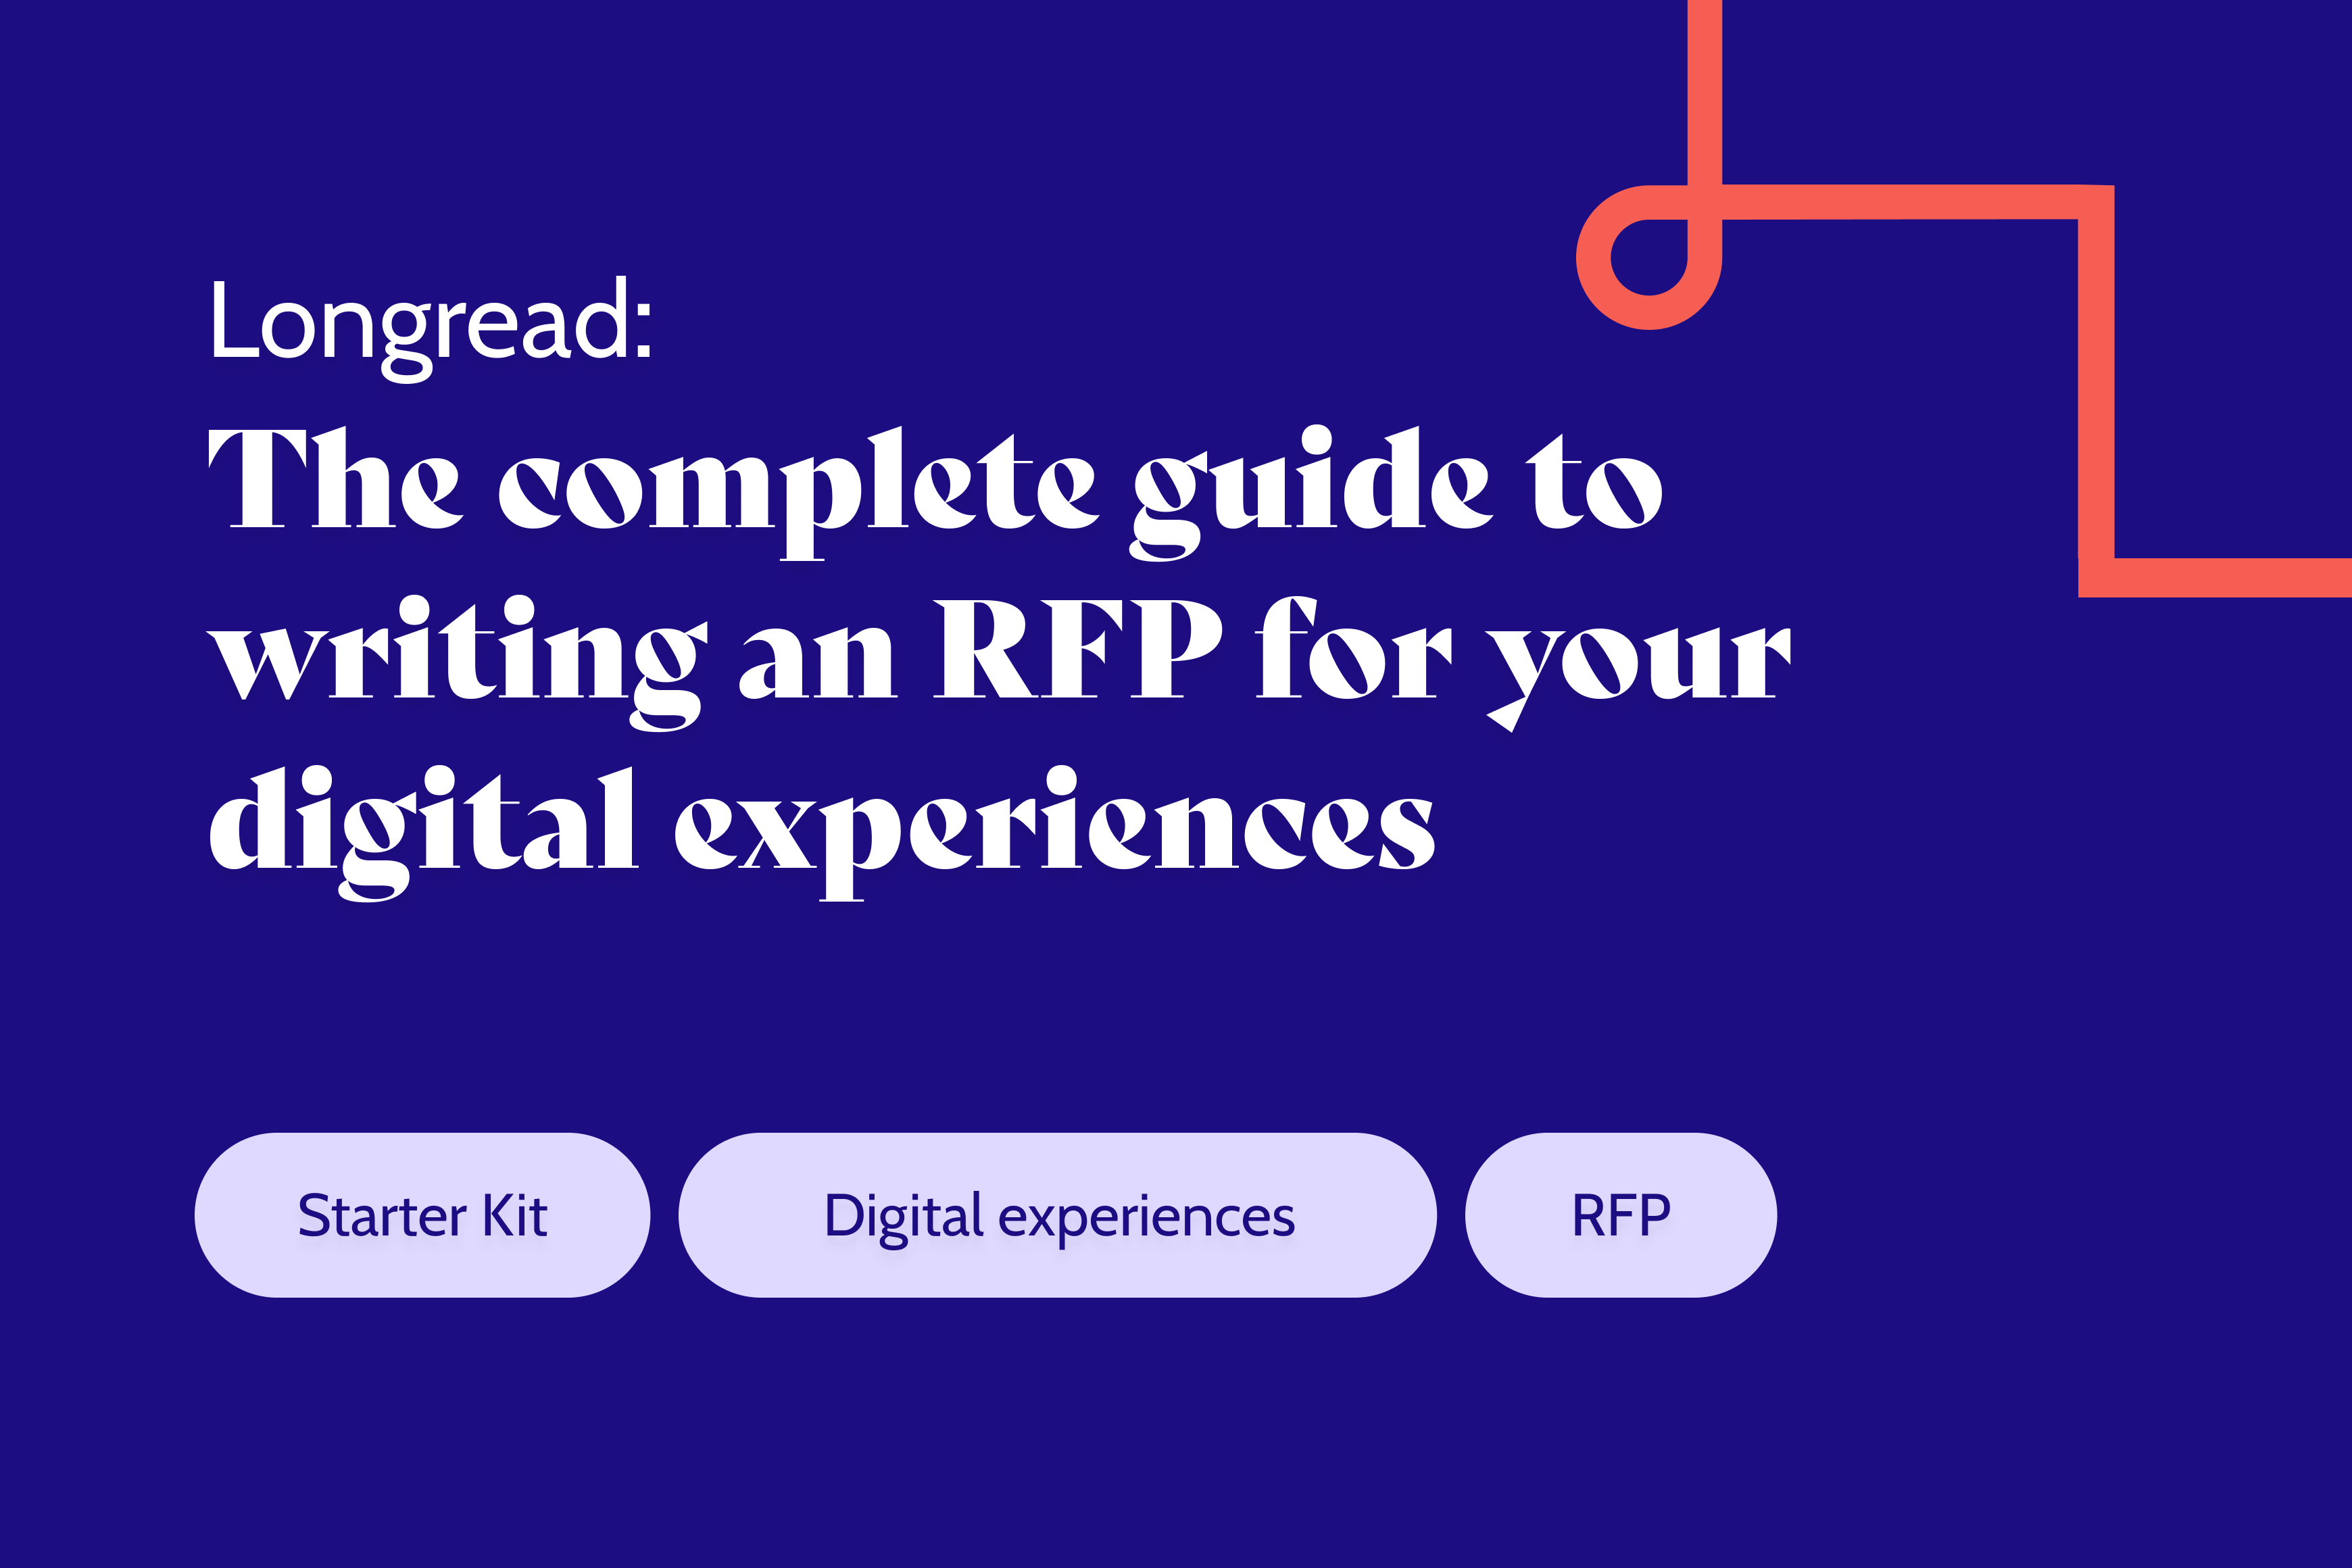 The complete guide to writing an RFP for your digital experiences